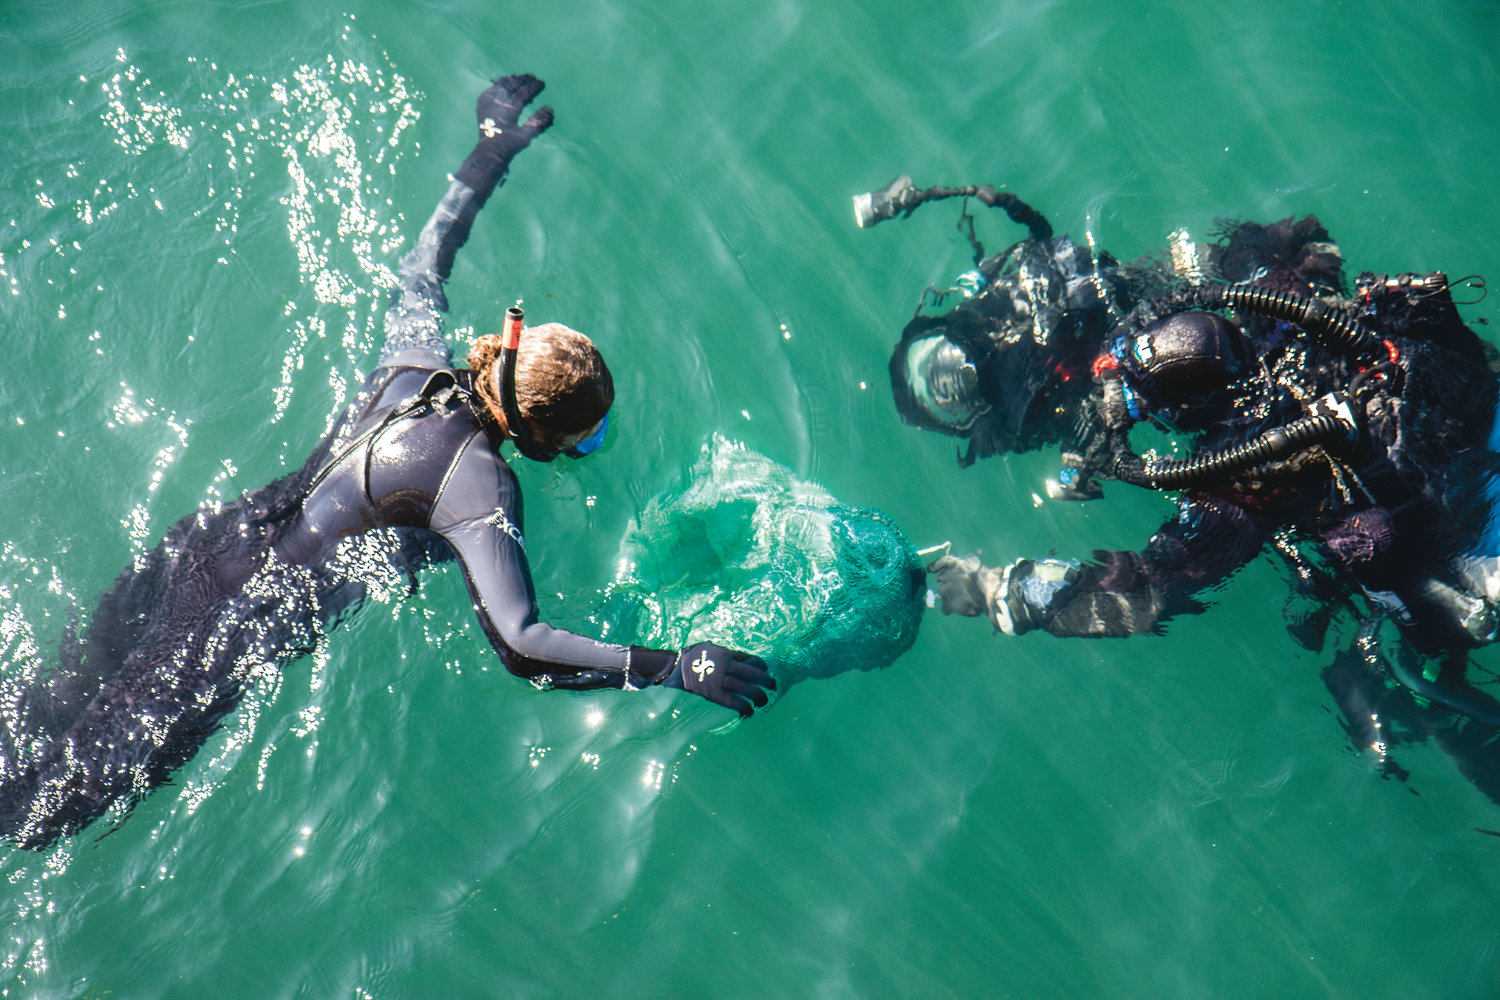 Ali Redman hands off Eleanora, the Giant Pacific Octopus to Florian Graner who is suited up in full diving gear to take her to a den on the seafloor, where they hope she will continue to live.